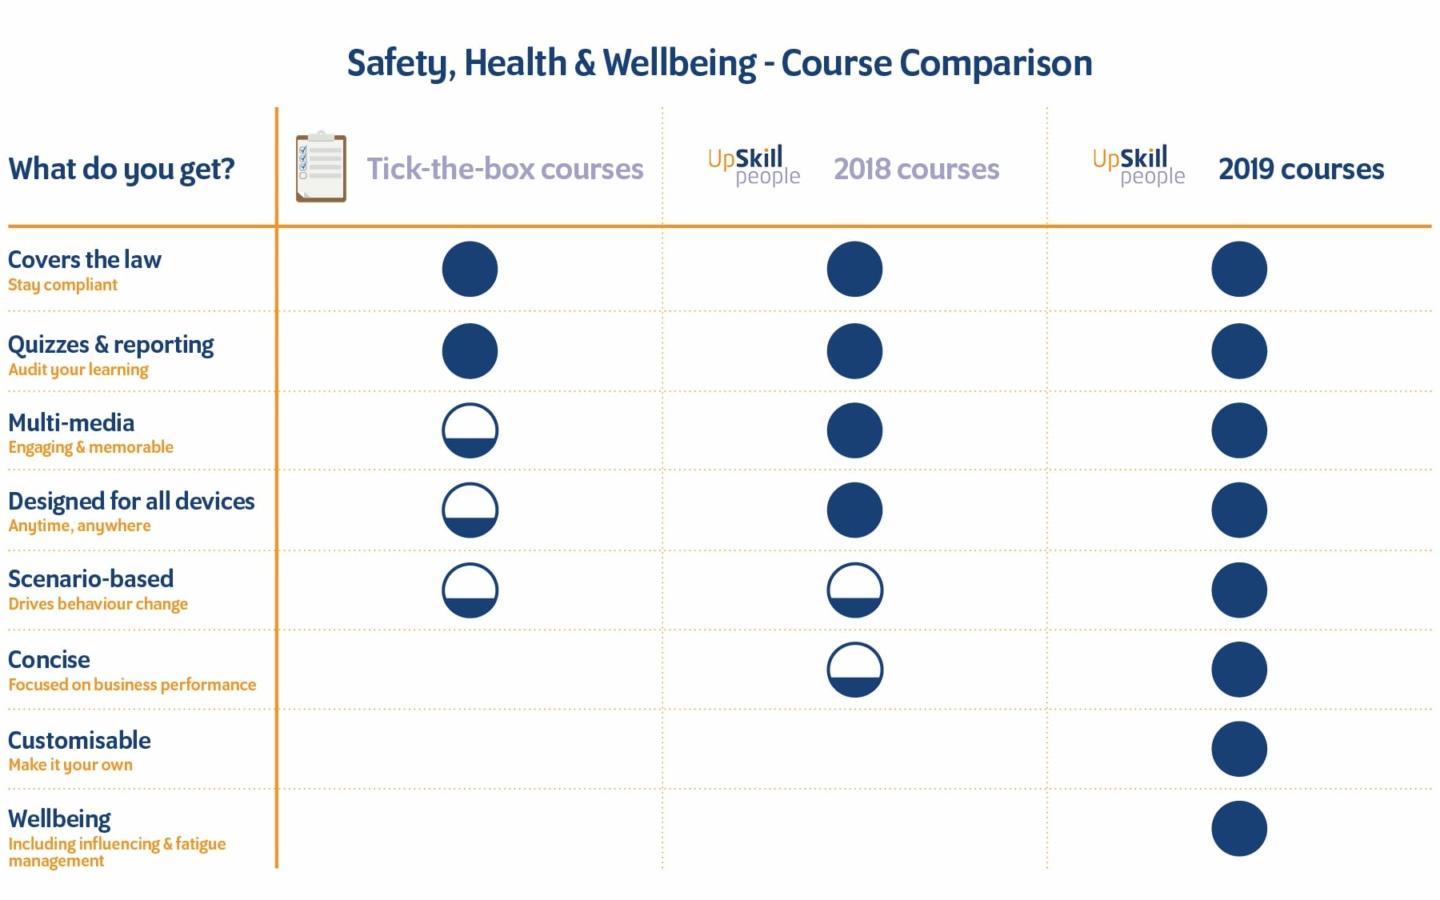 Elearning Course Resources by Upskill People comparisons